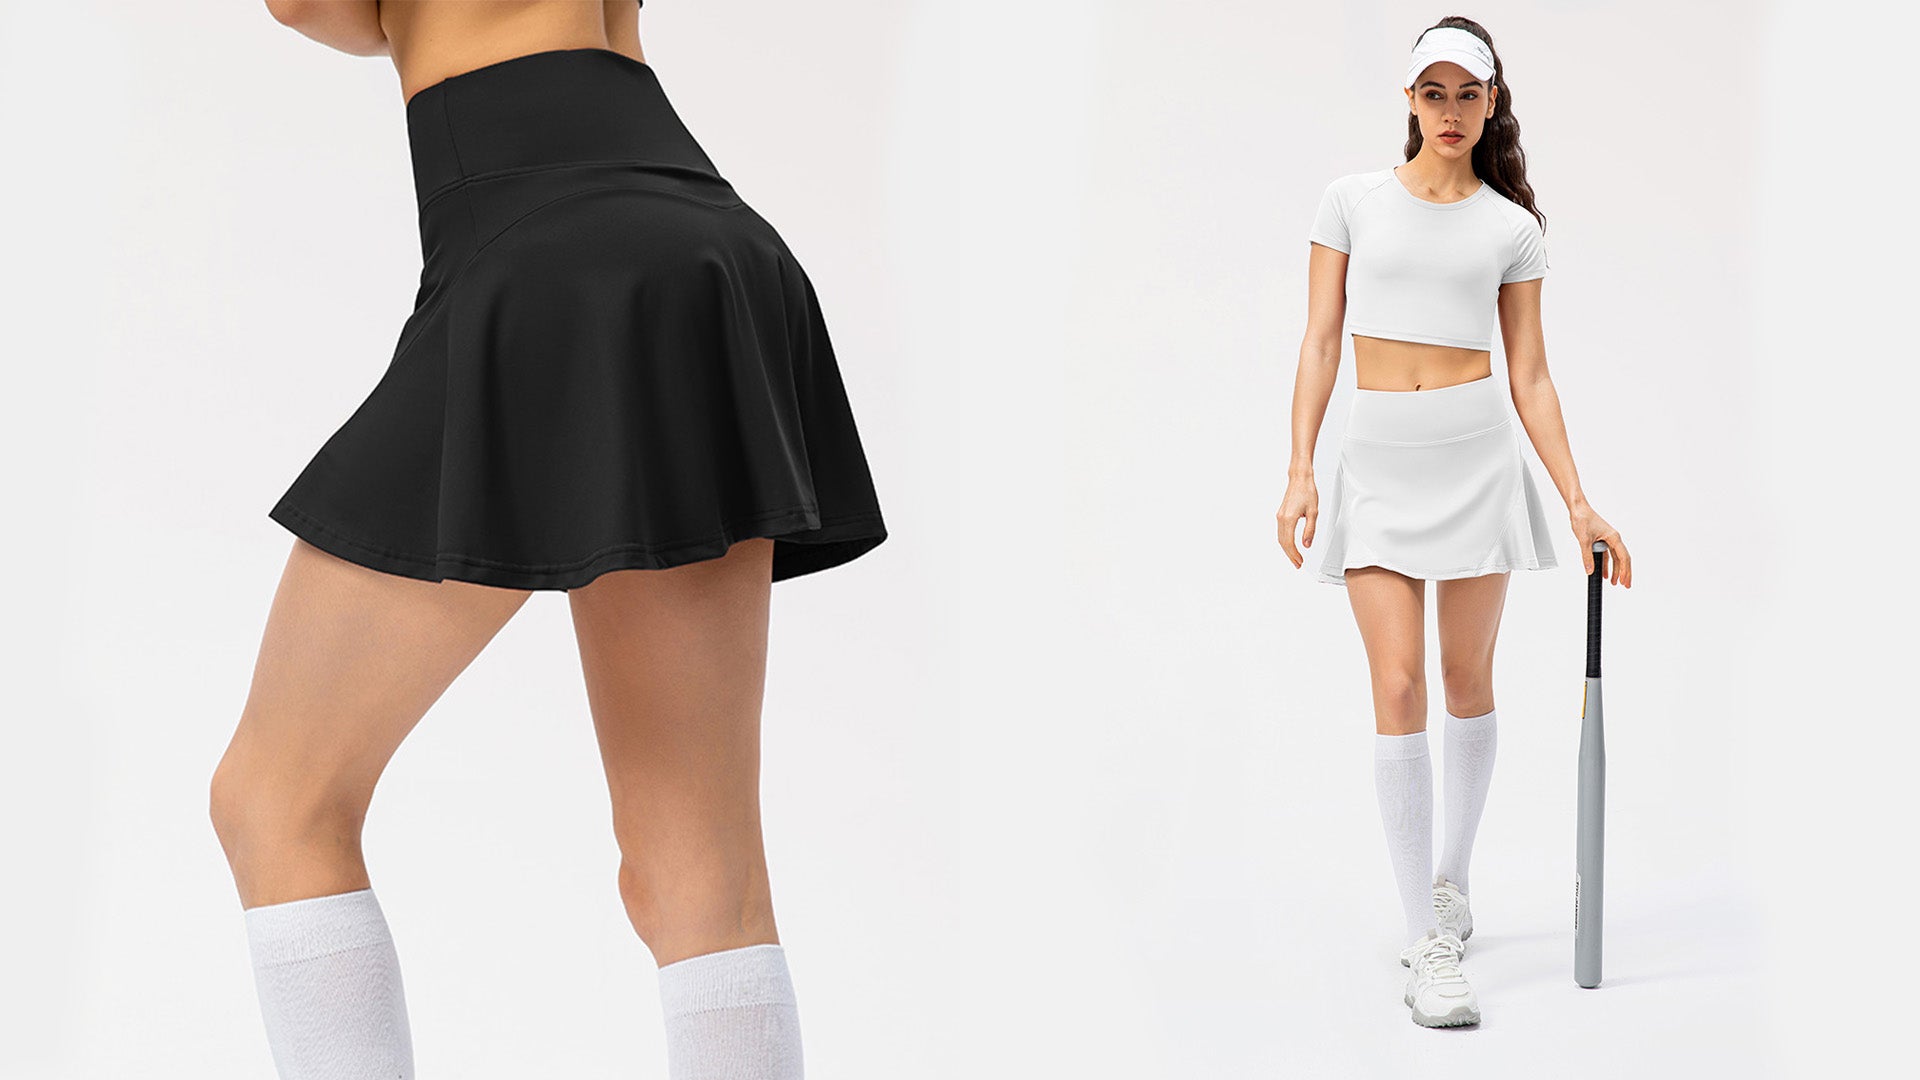 Noods Pleated High Waisted Tennis Skirt - A Great Tennis Skirt With Pocket Convenience